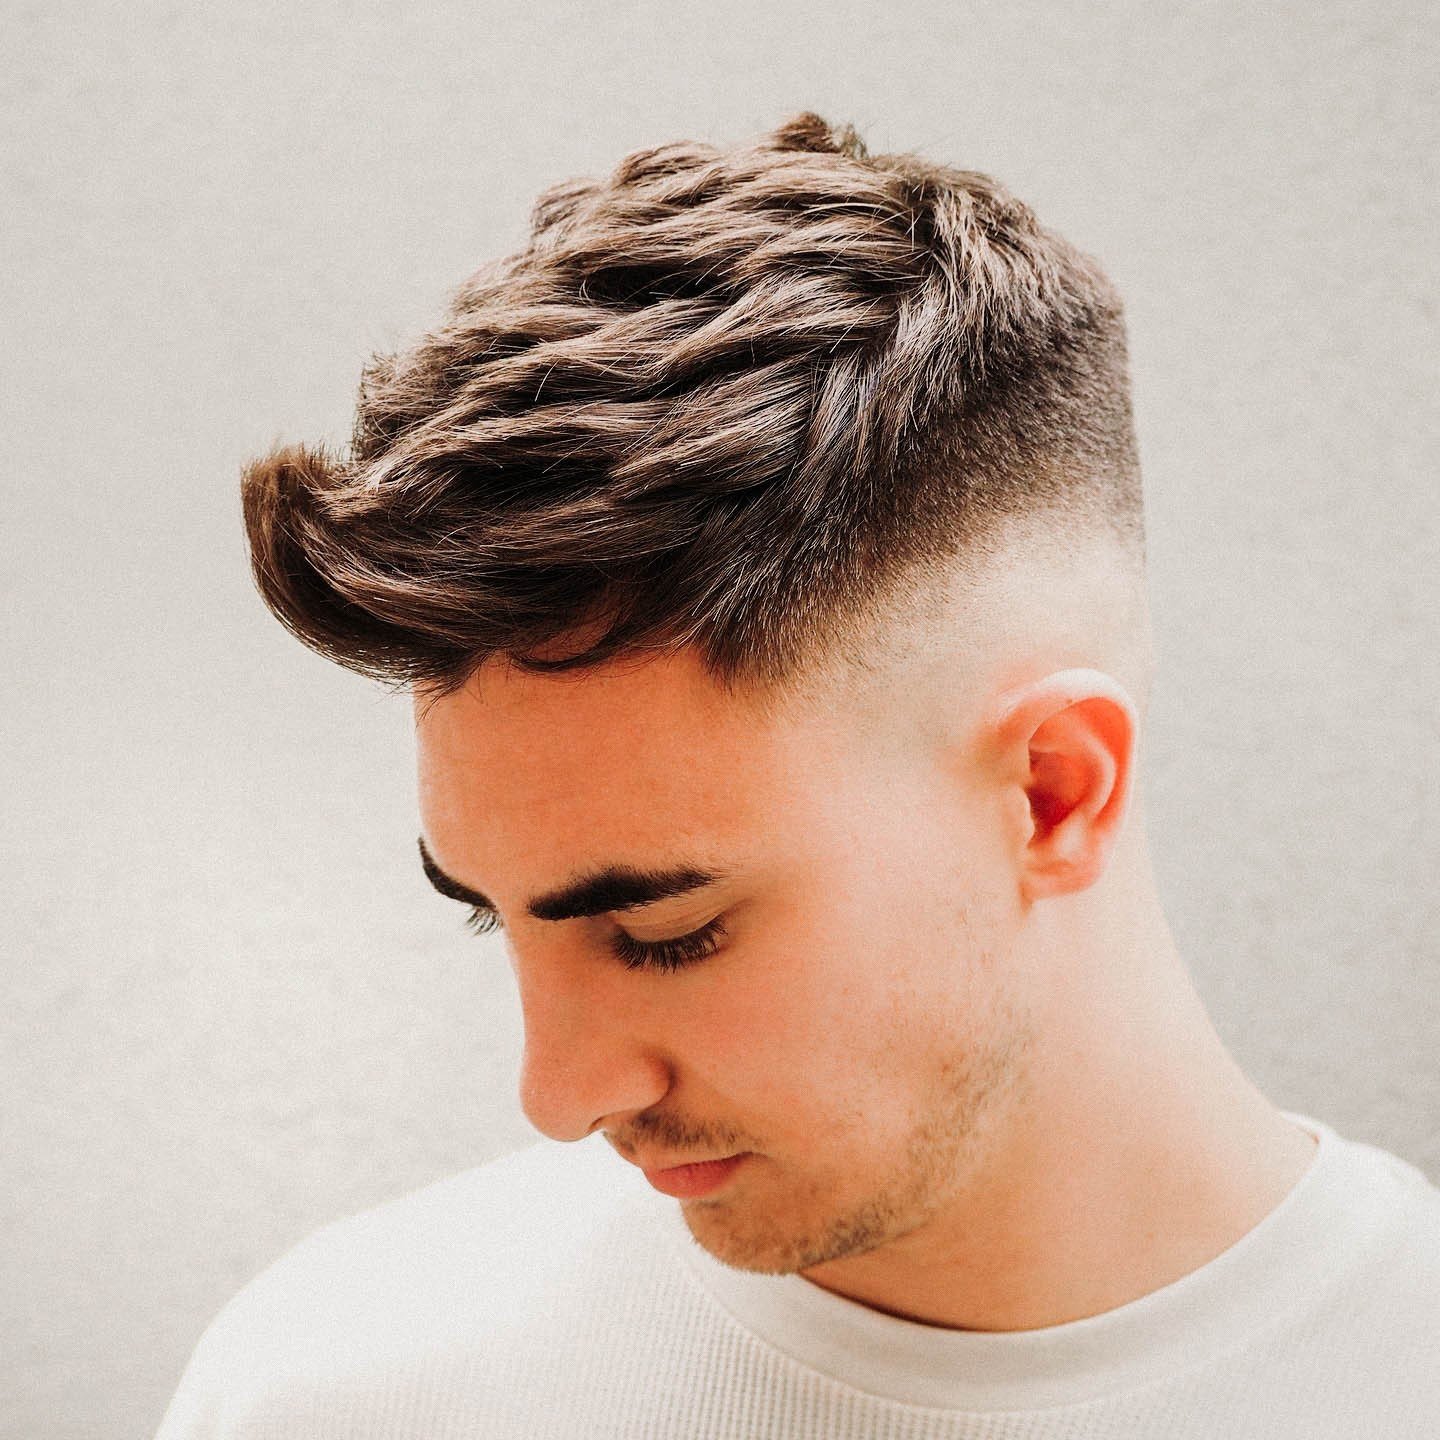 Looking for Cool and Stylish Mens Hairstyle for Oval Faces Here Are 10  Best Hairstyles for